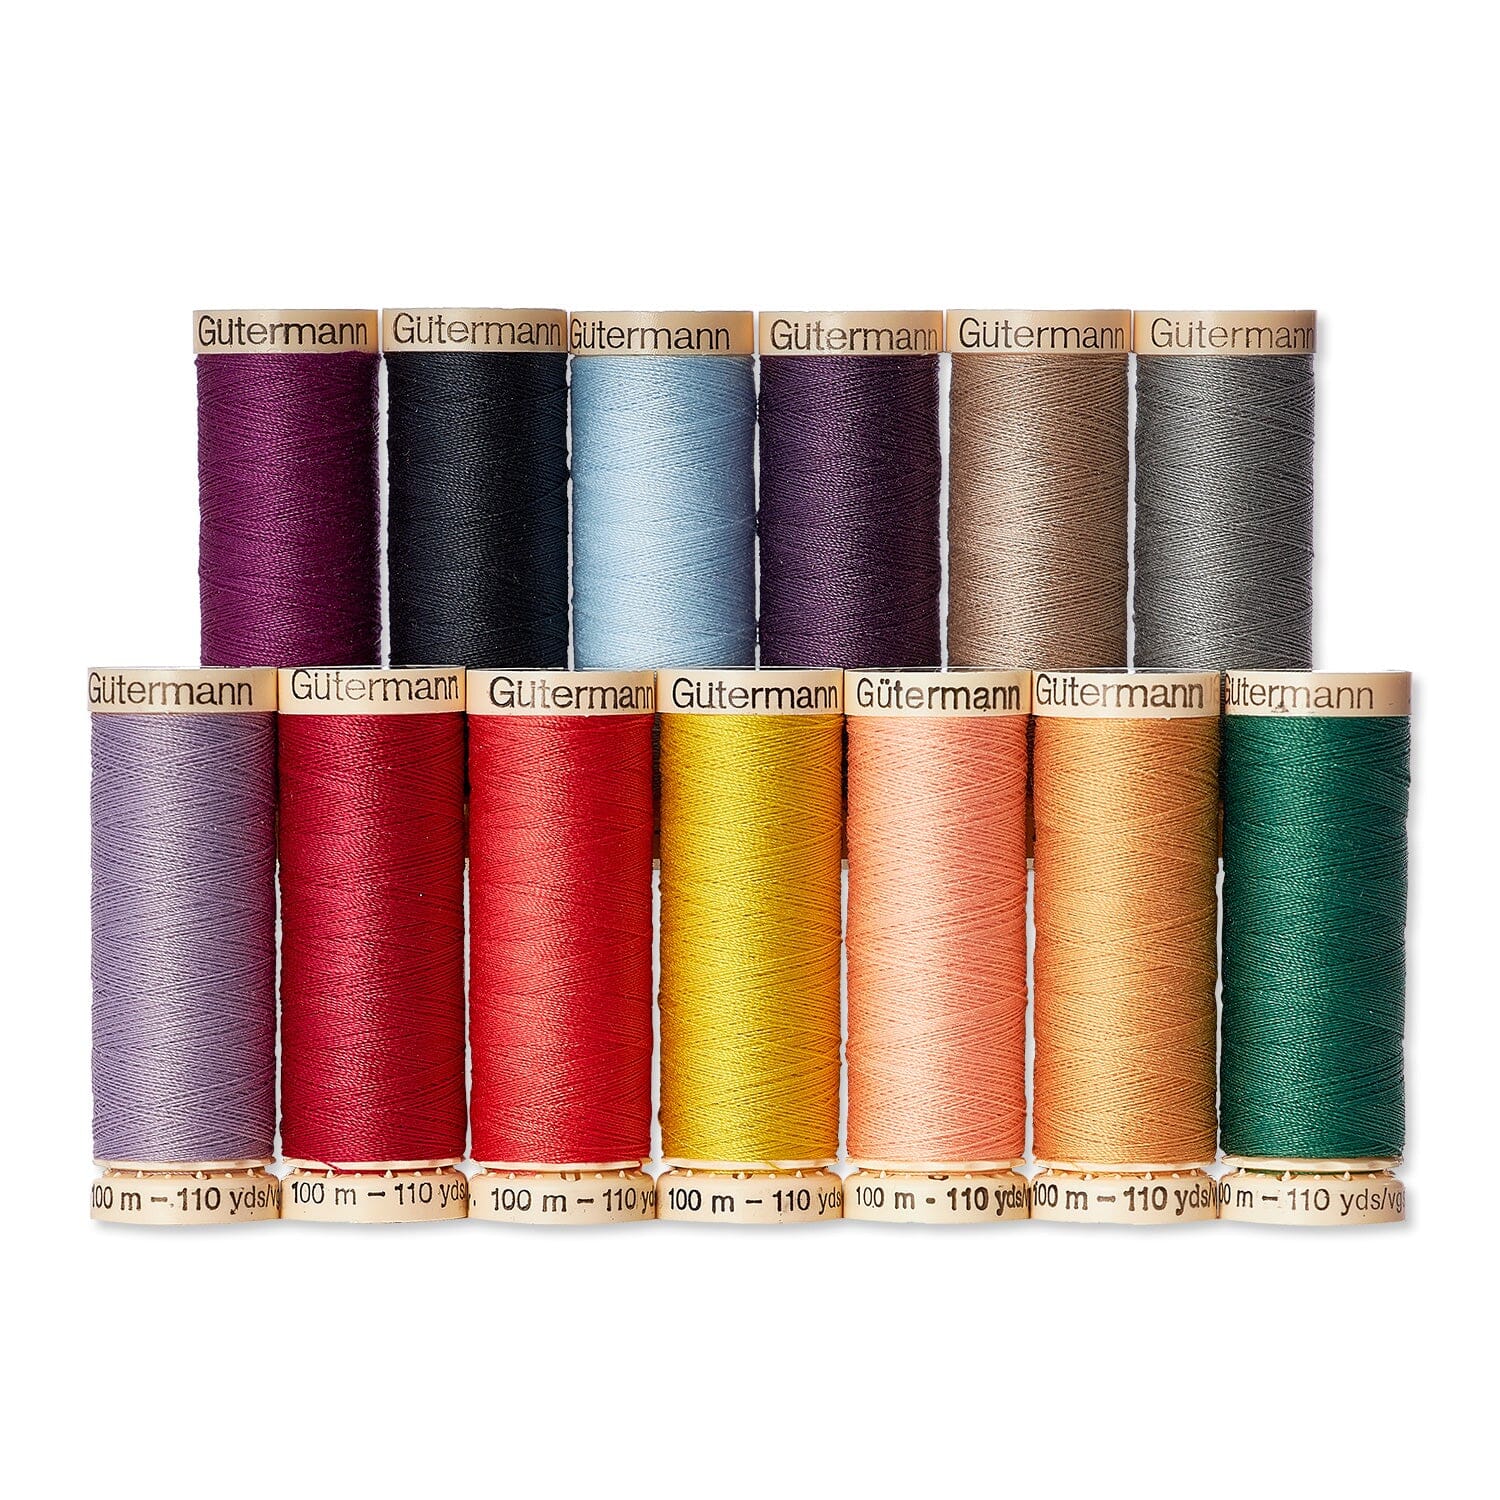 Gutermann Thread, 250M-430 Ruby Red, Sew-All Polyester All Purpose